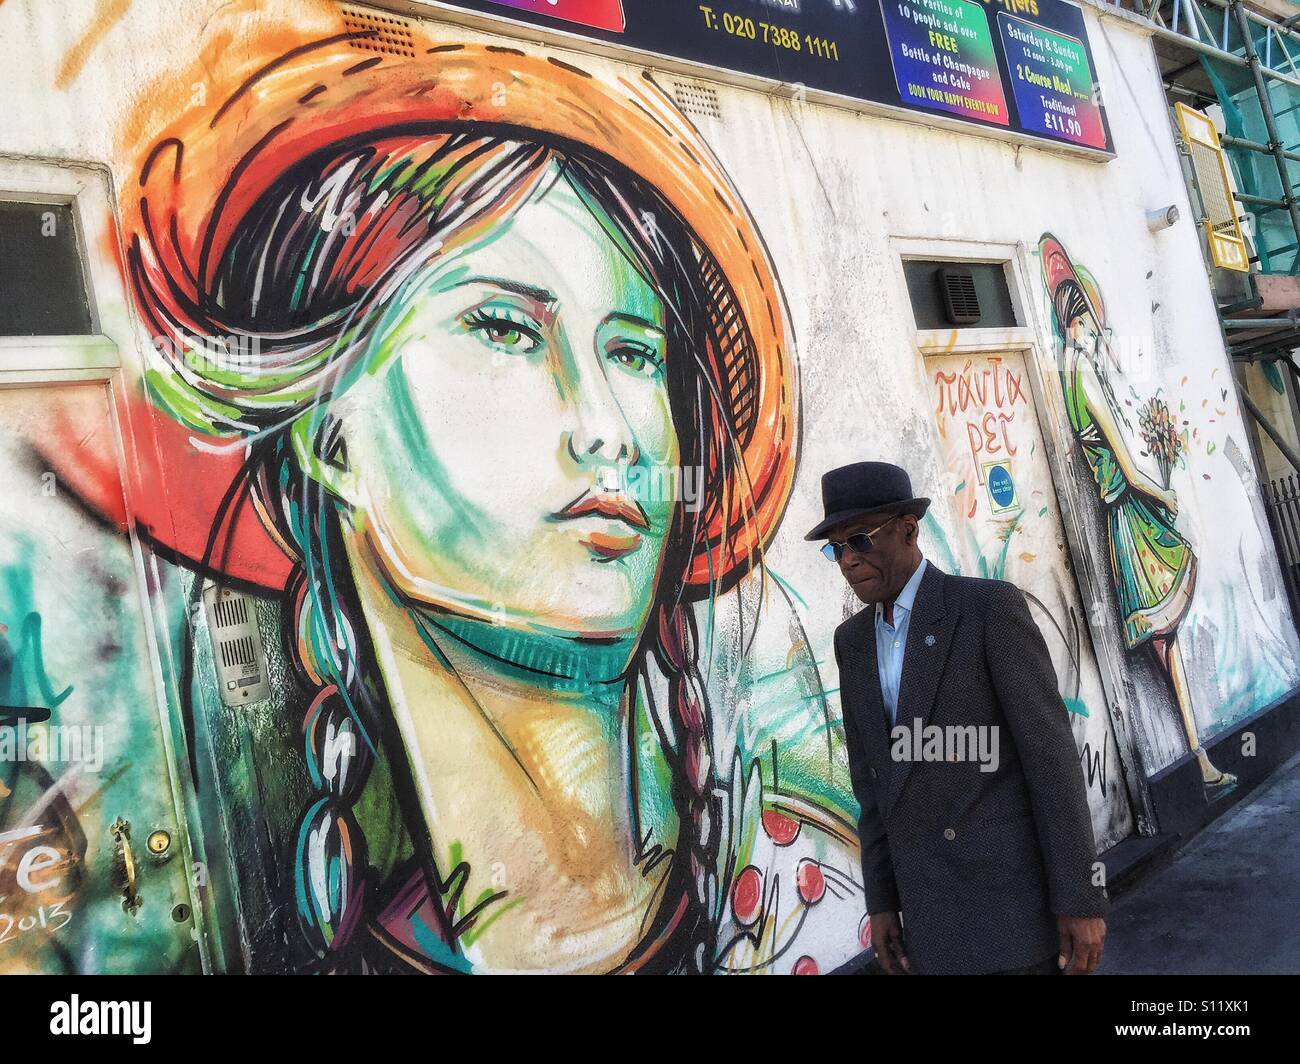 Pedestrian passing by a brightly painted mural of a woman's face in Camden Town, London, U.K. Stock Photo